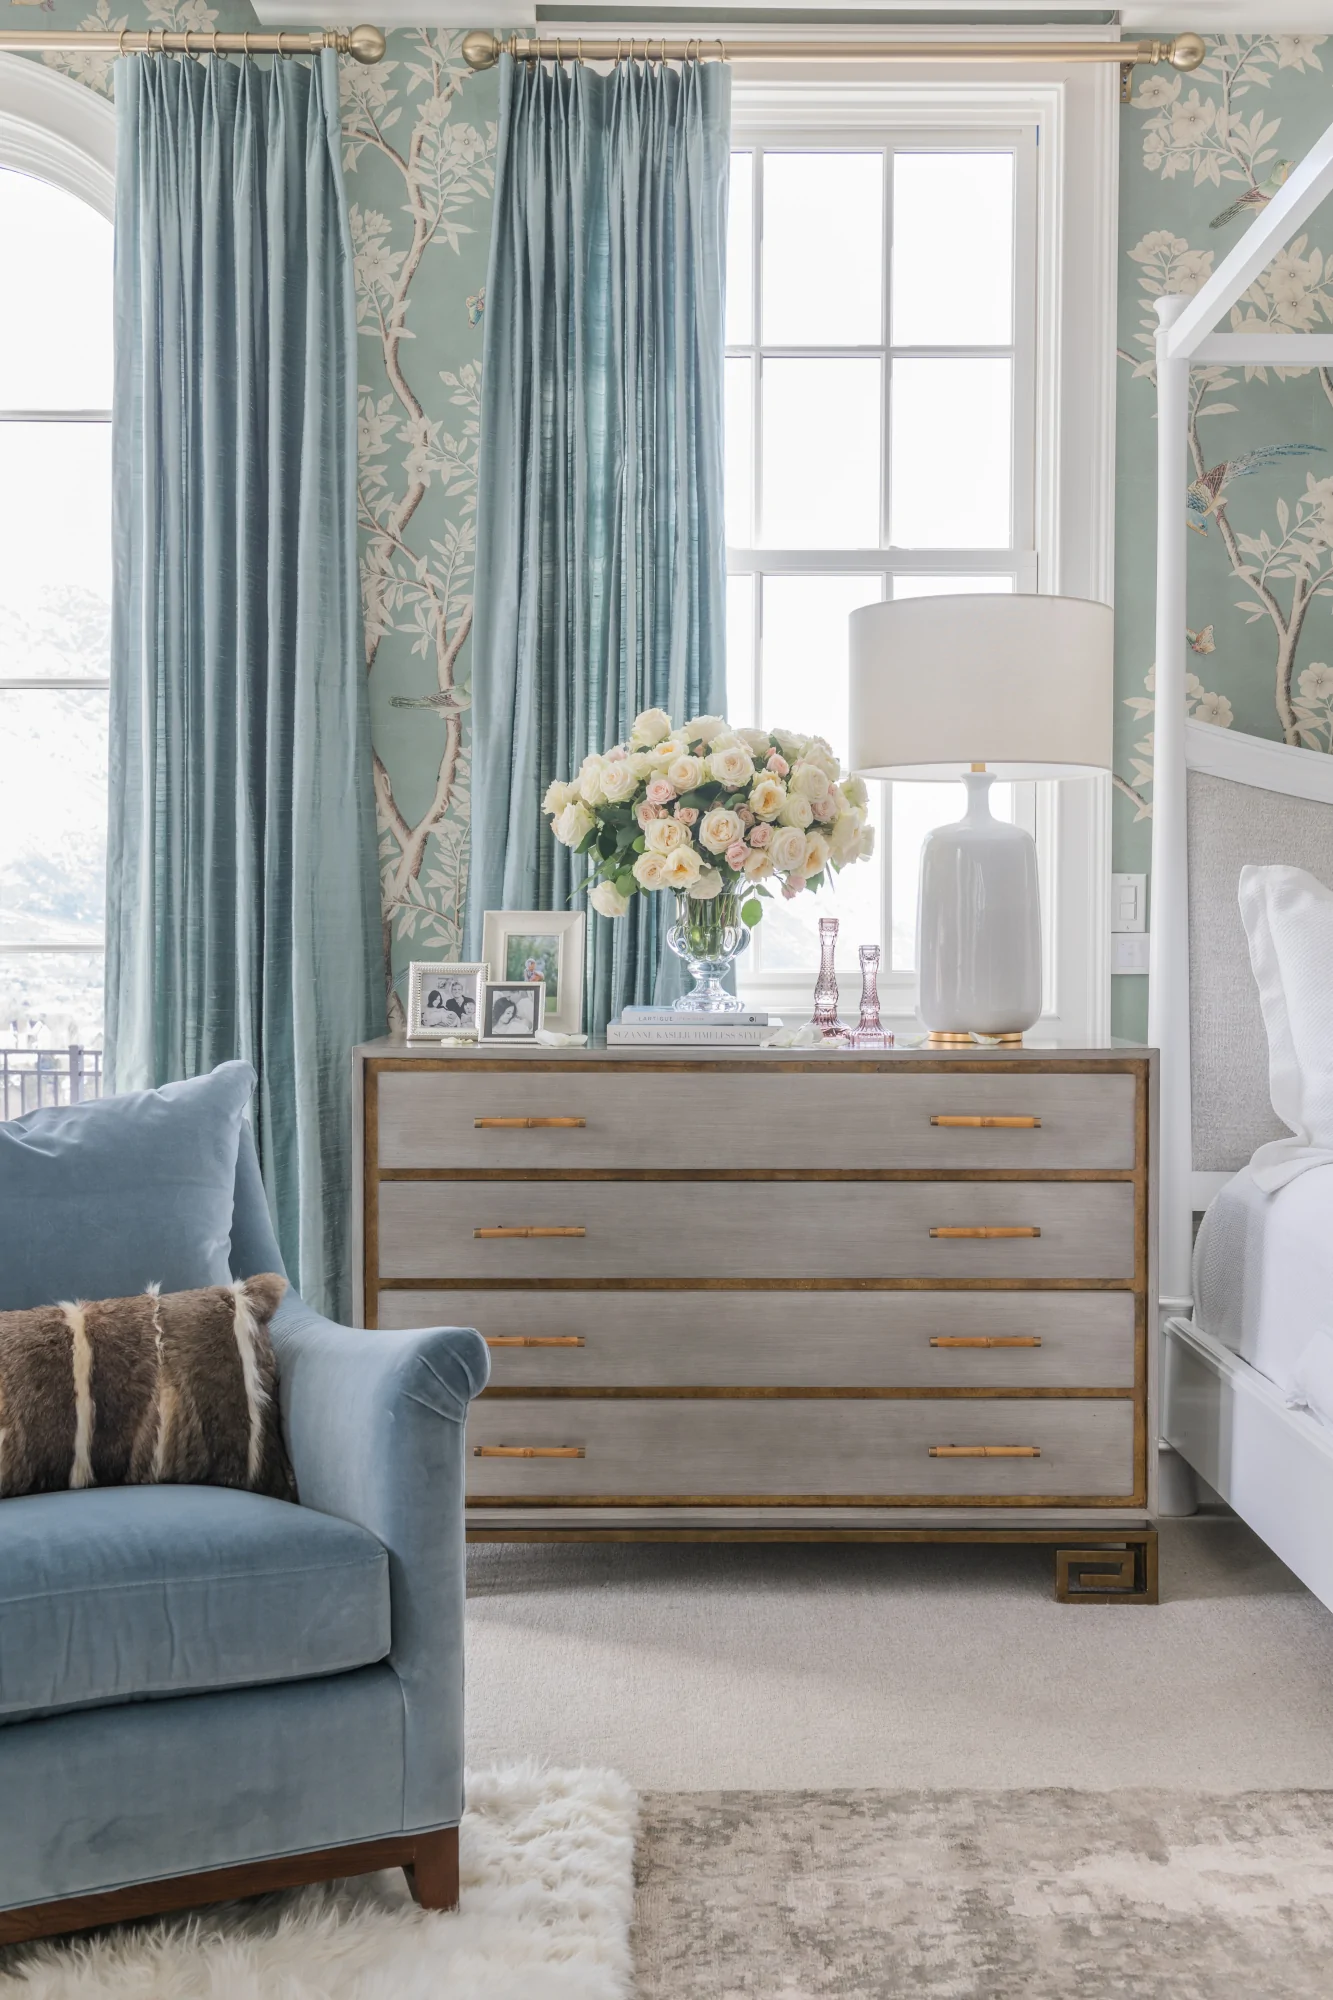 Soft aqua drapes and matching patterned wallpaper with a grey nightstand with white table lamp.